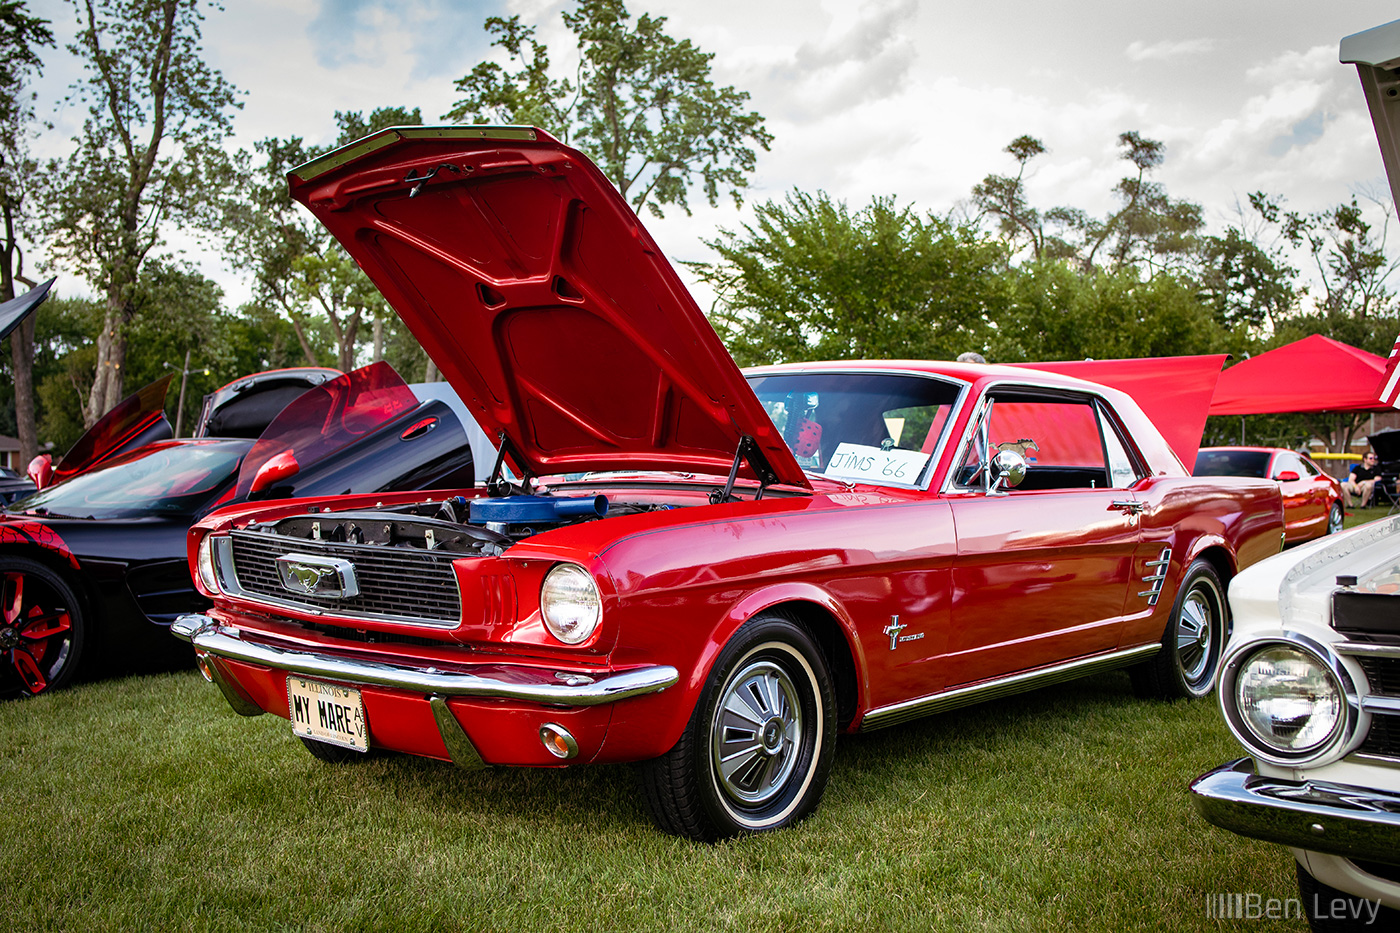 Red 1966 Ford Mustang at Cruise Night in Hillside